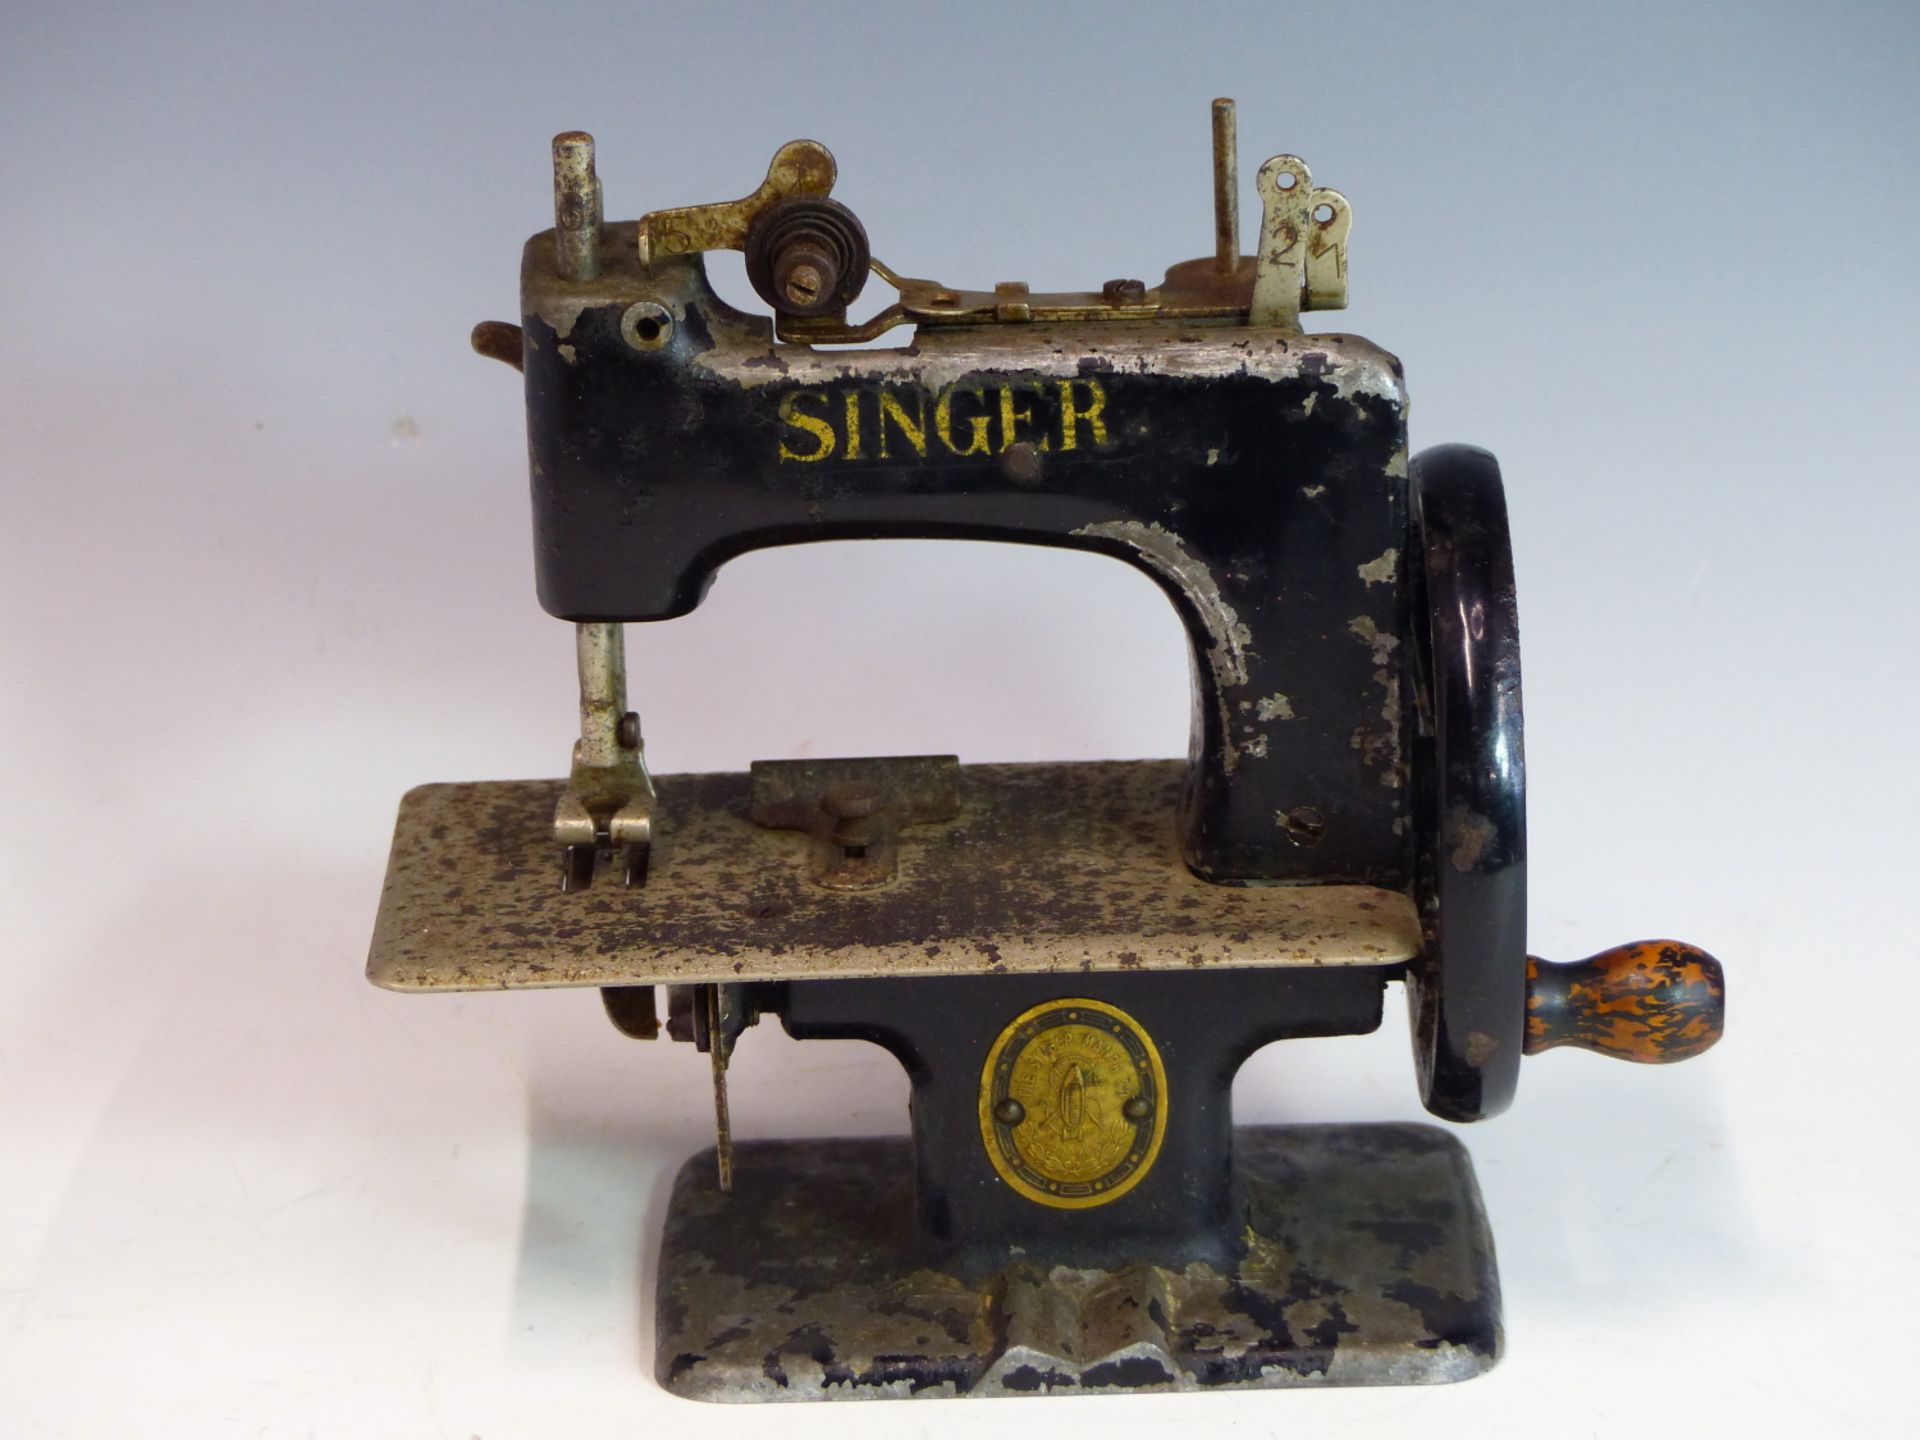 A VINTAGE SINGER MINIATURE SEWING MACHINE WITH ALLOY BODY. - Image 4 of 4